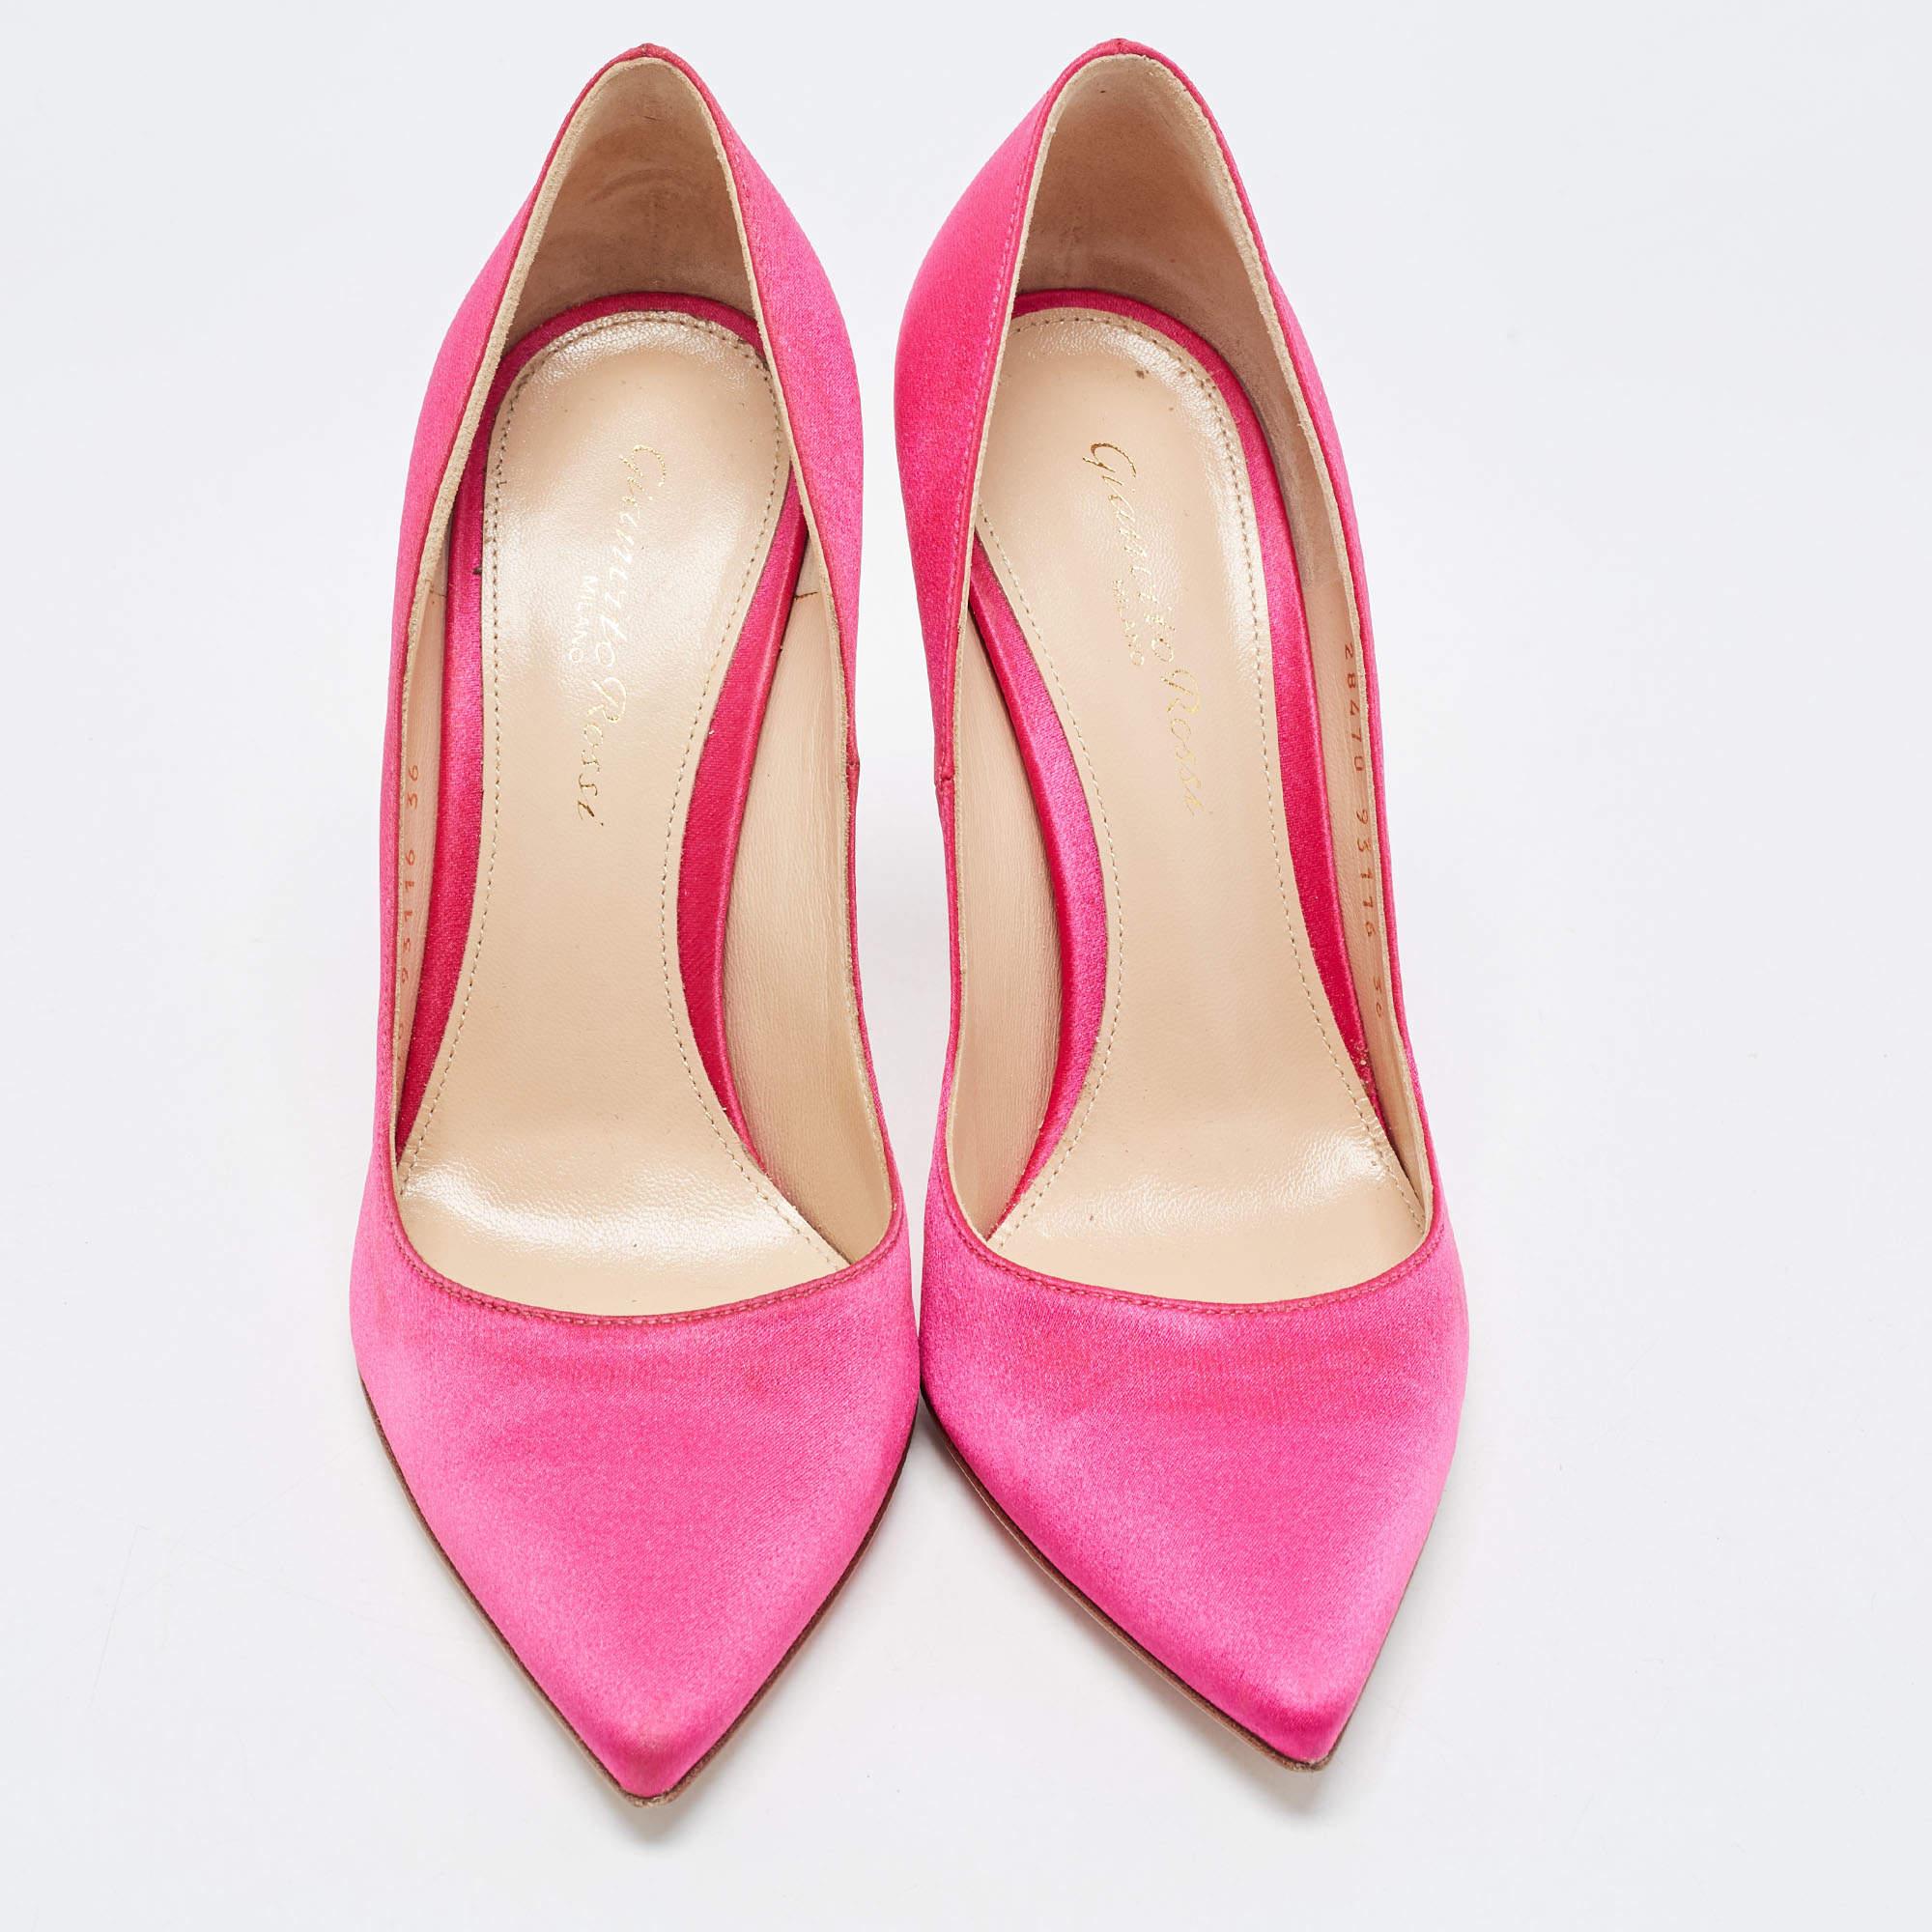 Exhibit an elegant style with this pair of pumps. These elegant shoes are crafted from quality materials. They are set on durable soles and sleek heels.

Includes: Original Dustbag, Original Box, Info Booklet, Extra Heel Tips

